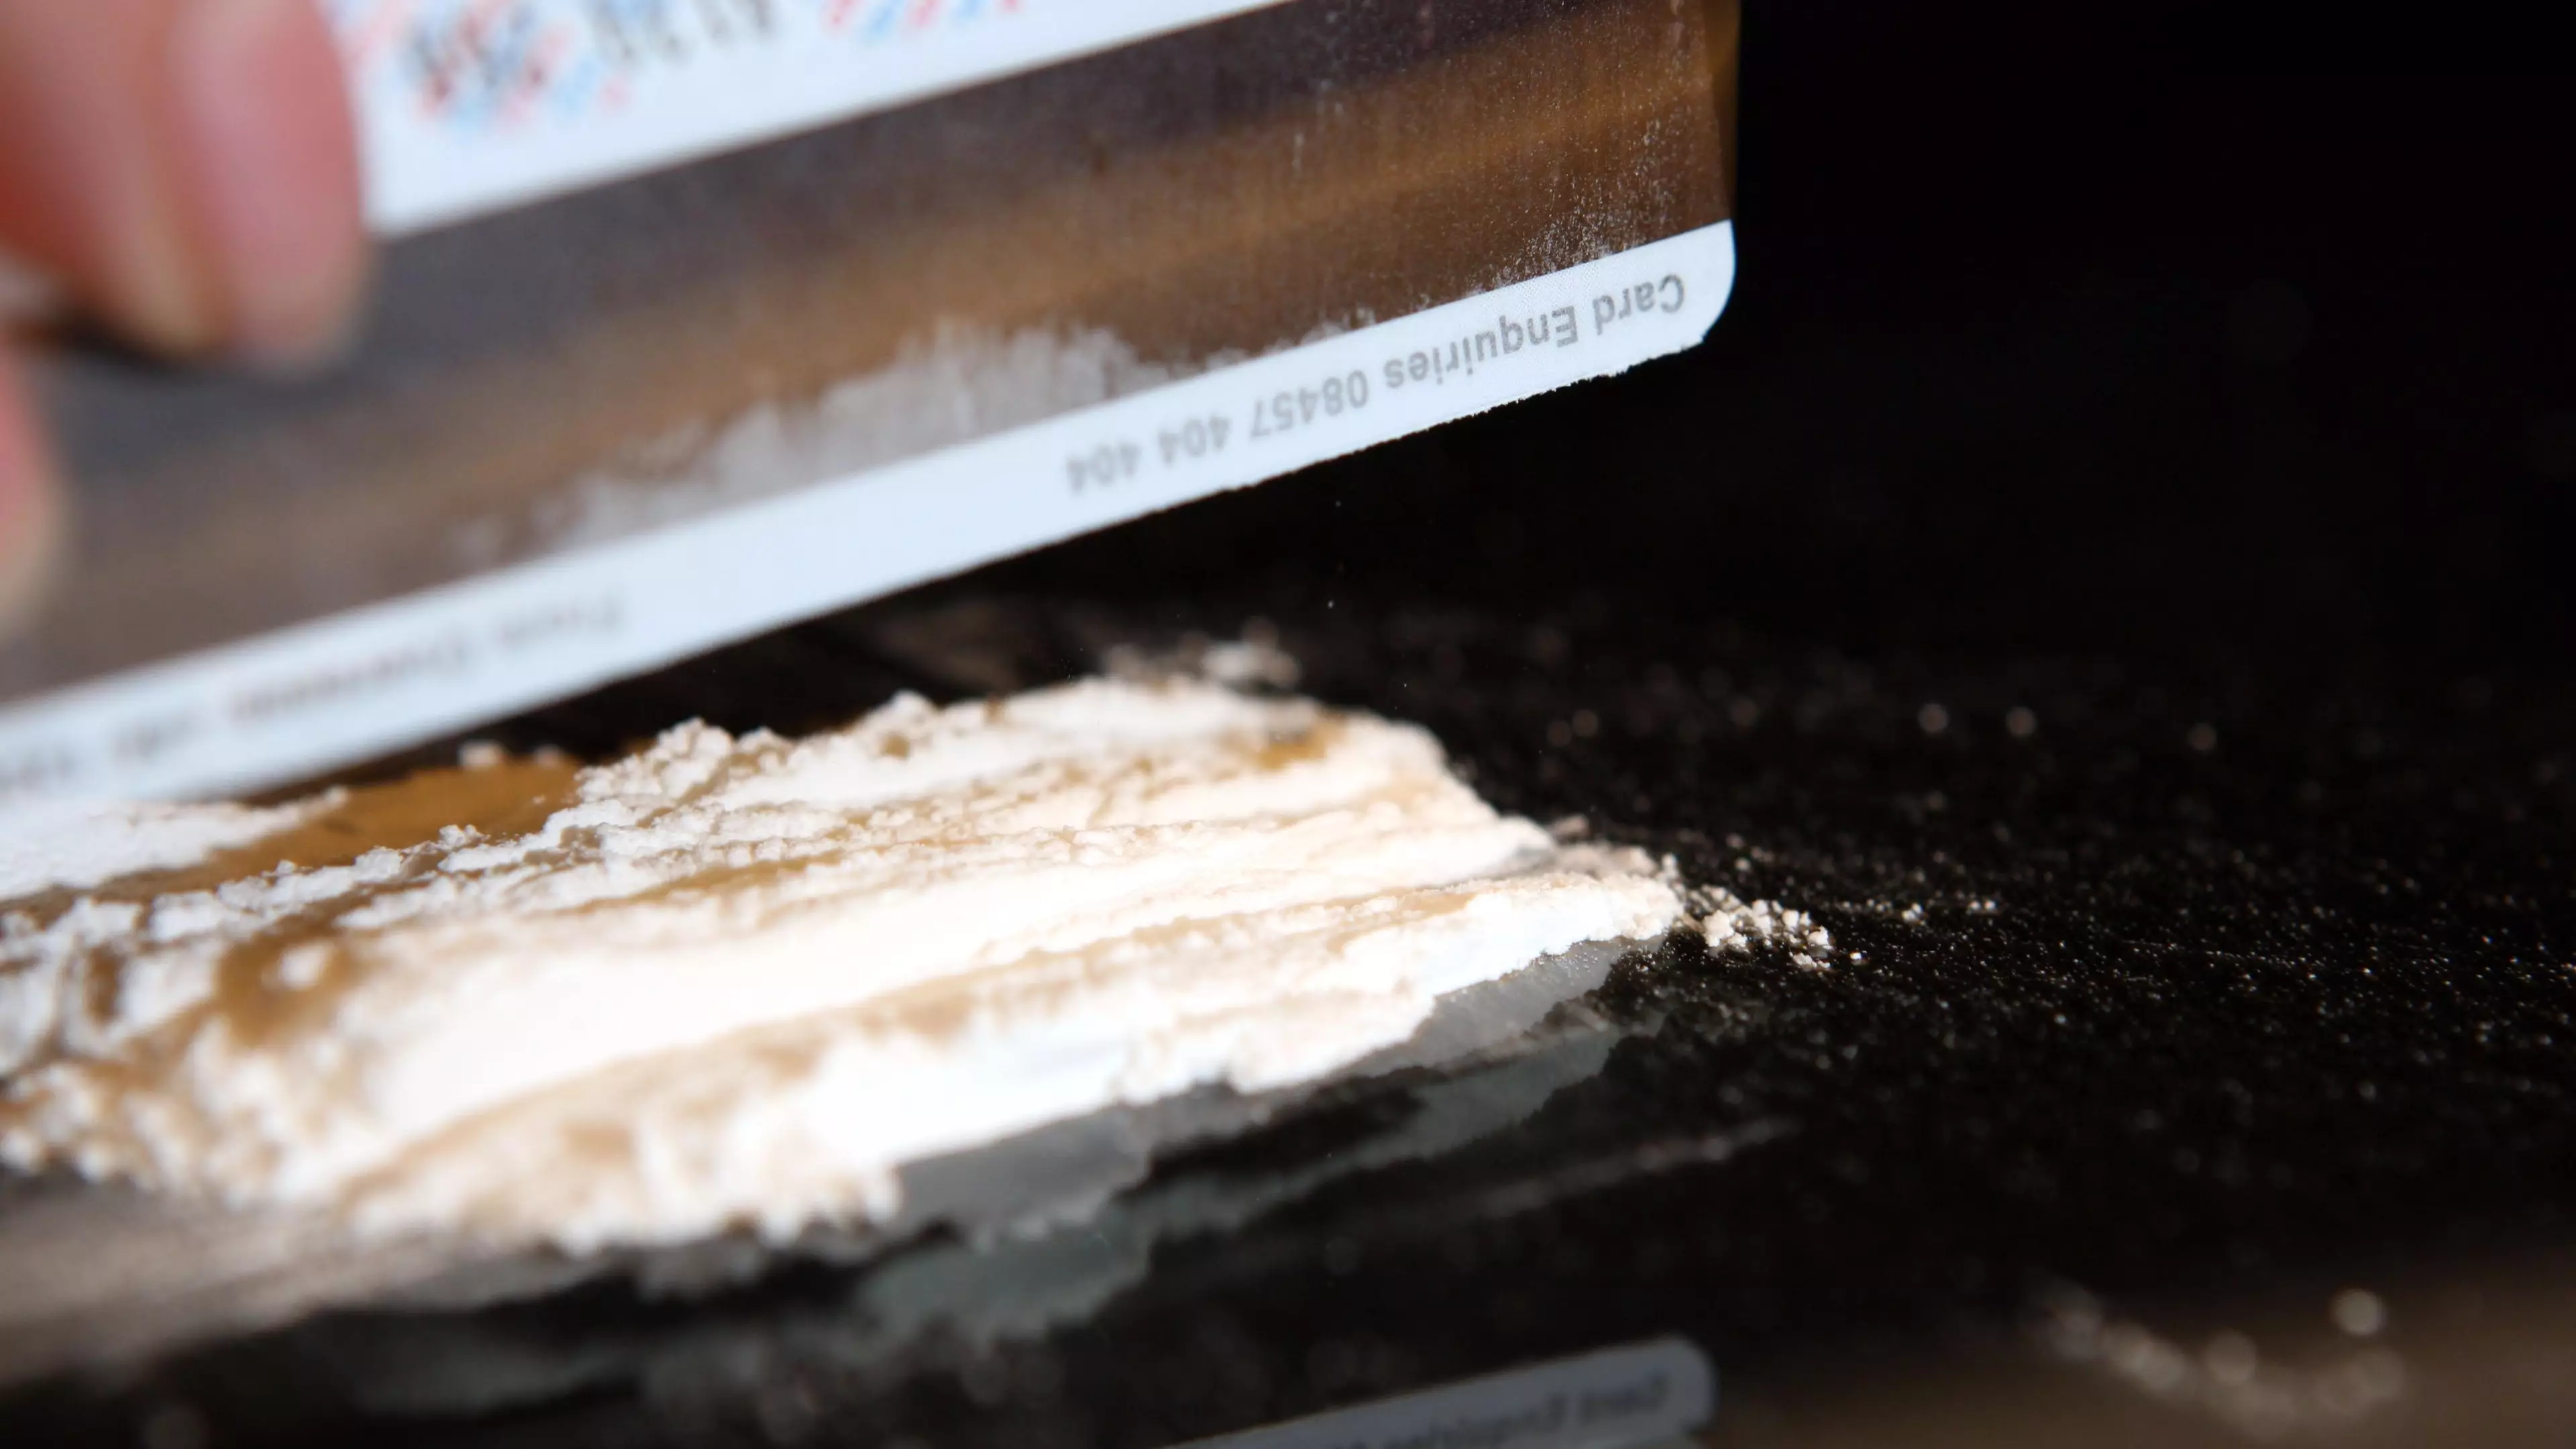 People Who Mix Cocaine And Alcohol Are More Likely To Attempt Suicide